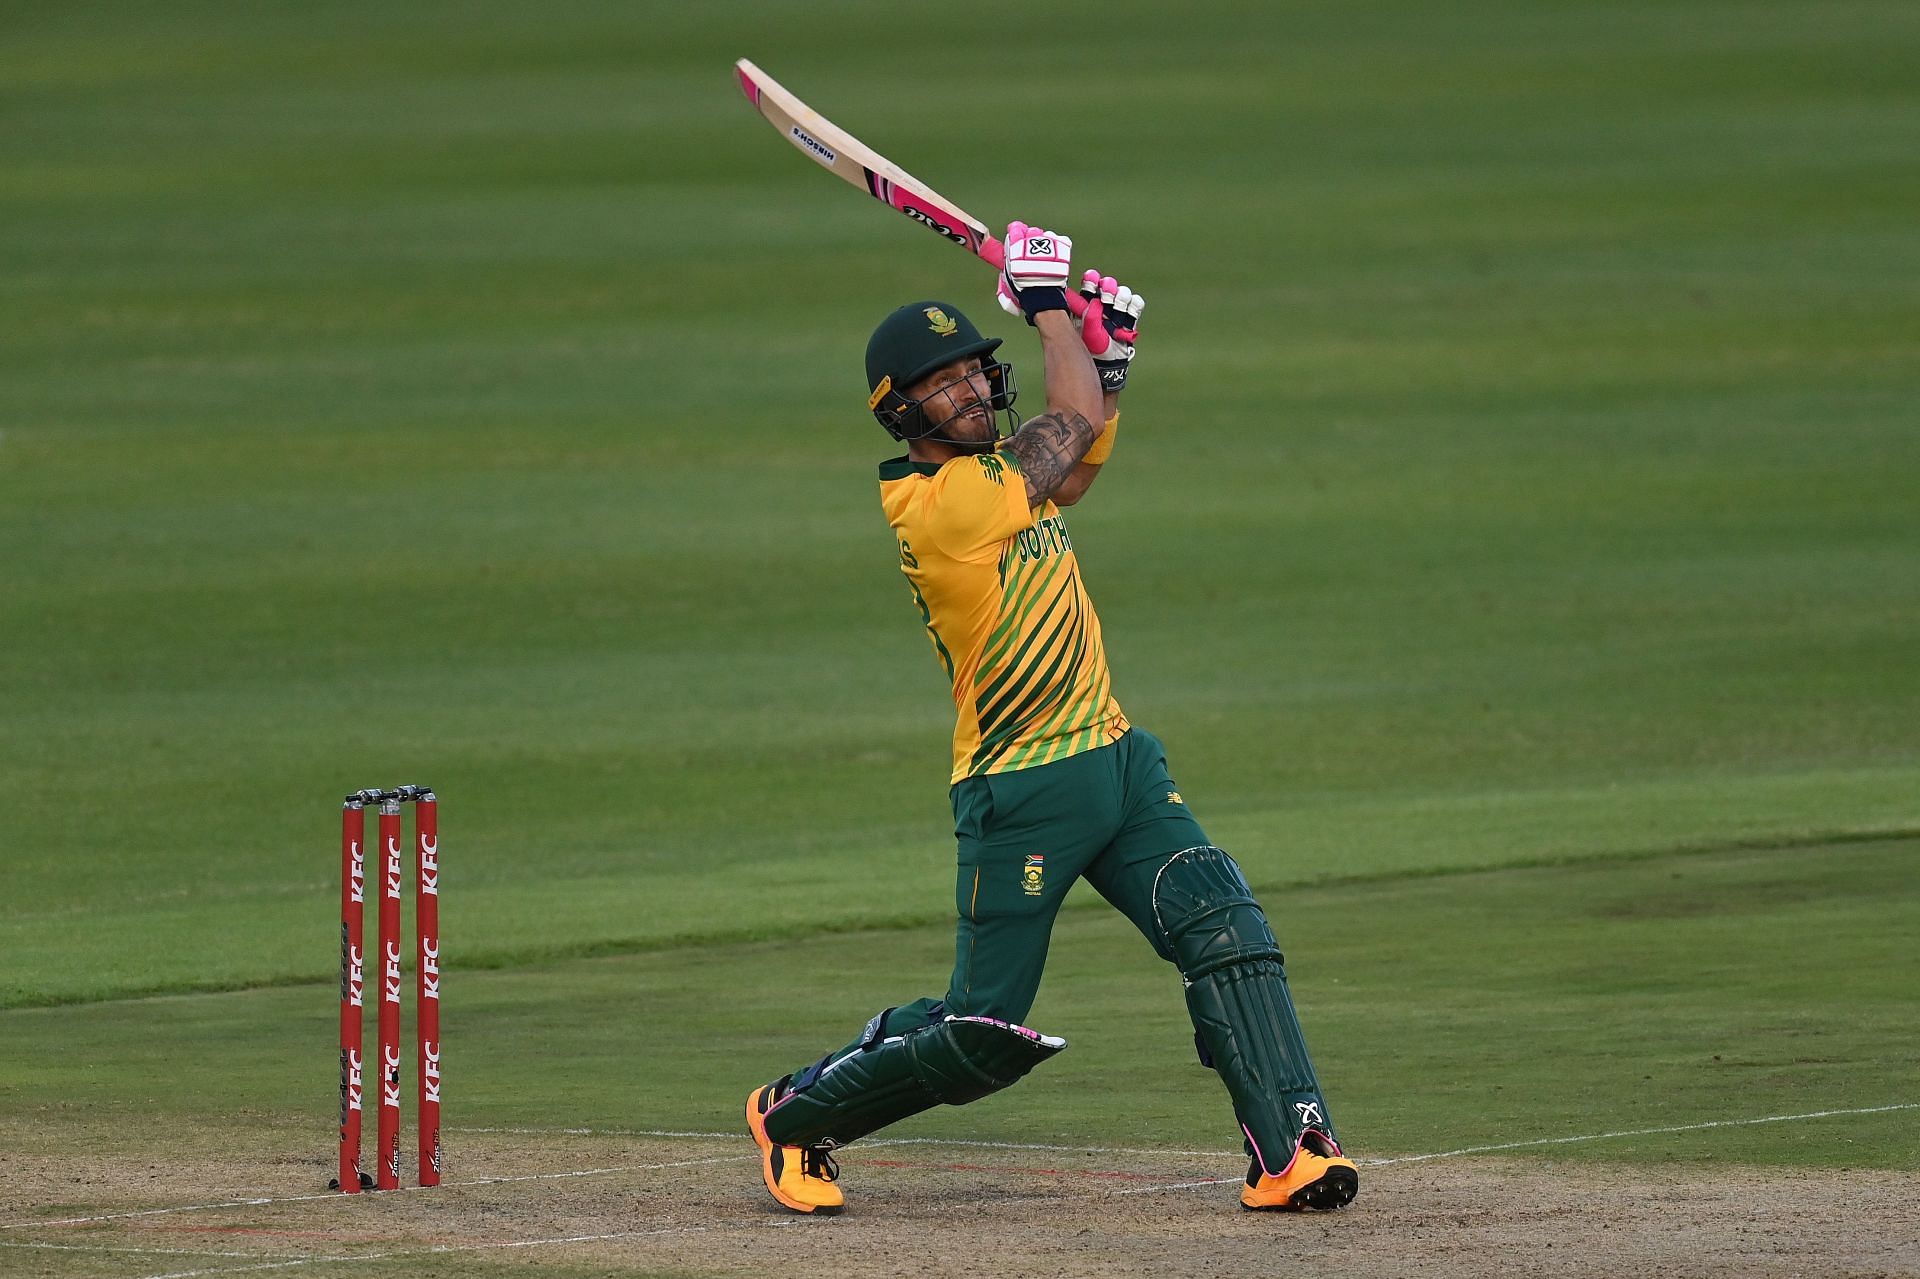 Faf du Plessis will be the one to watch out for here